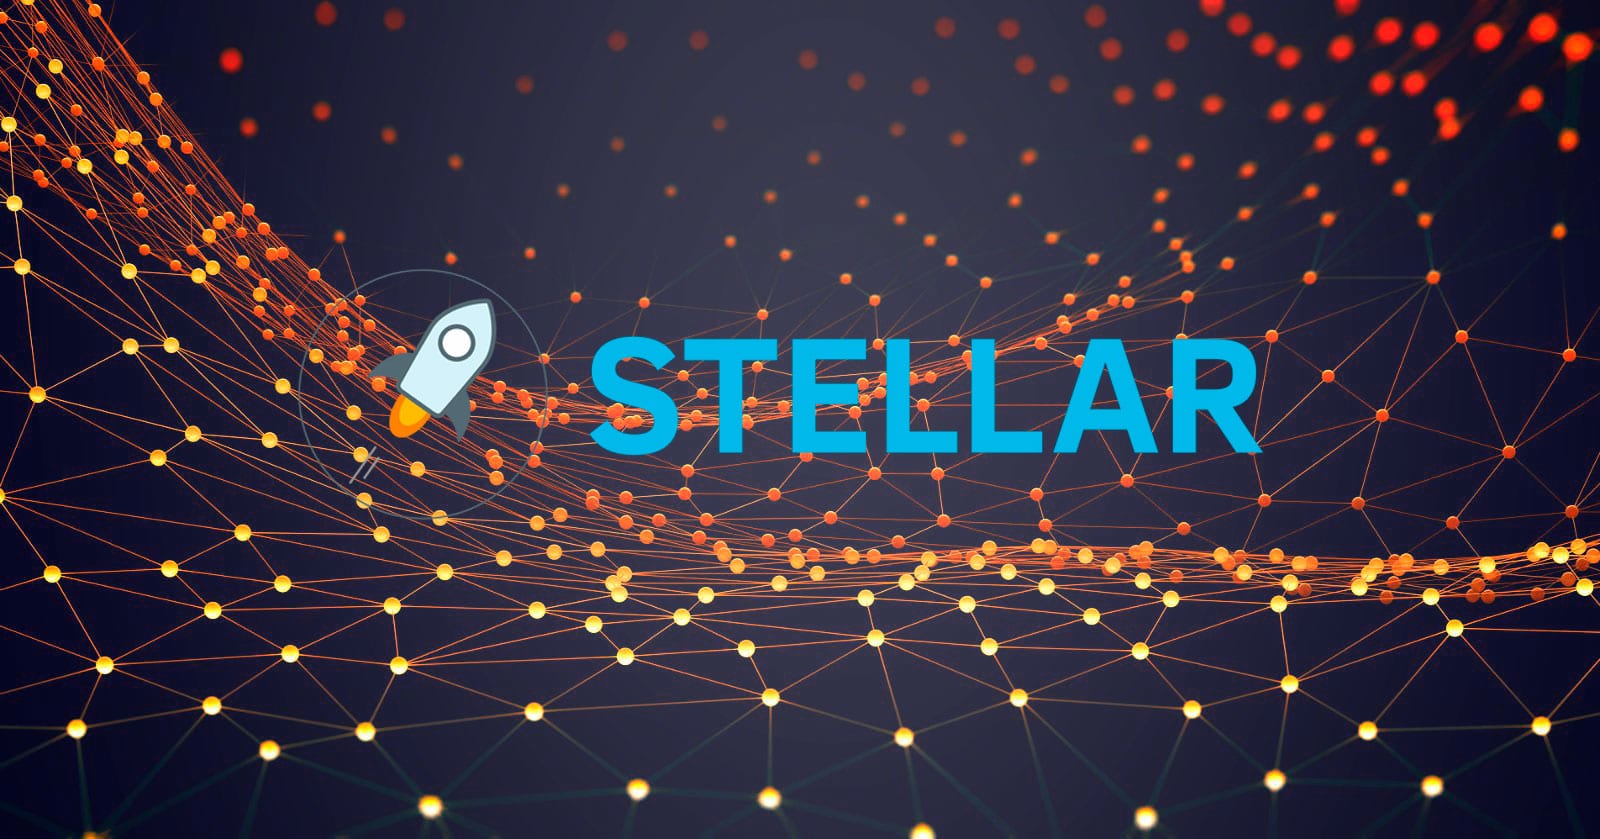 STELLAR 2019 ROUNDUP IS NOW RELEASED